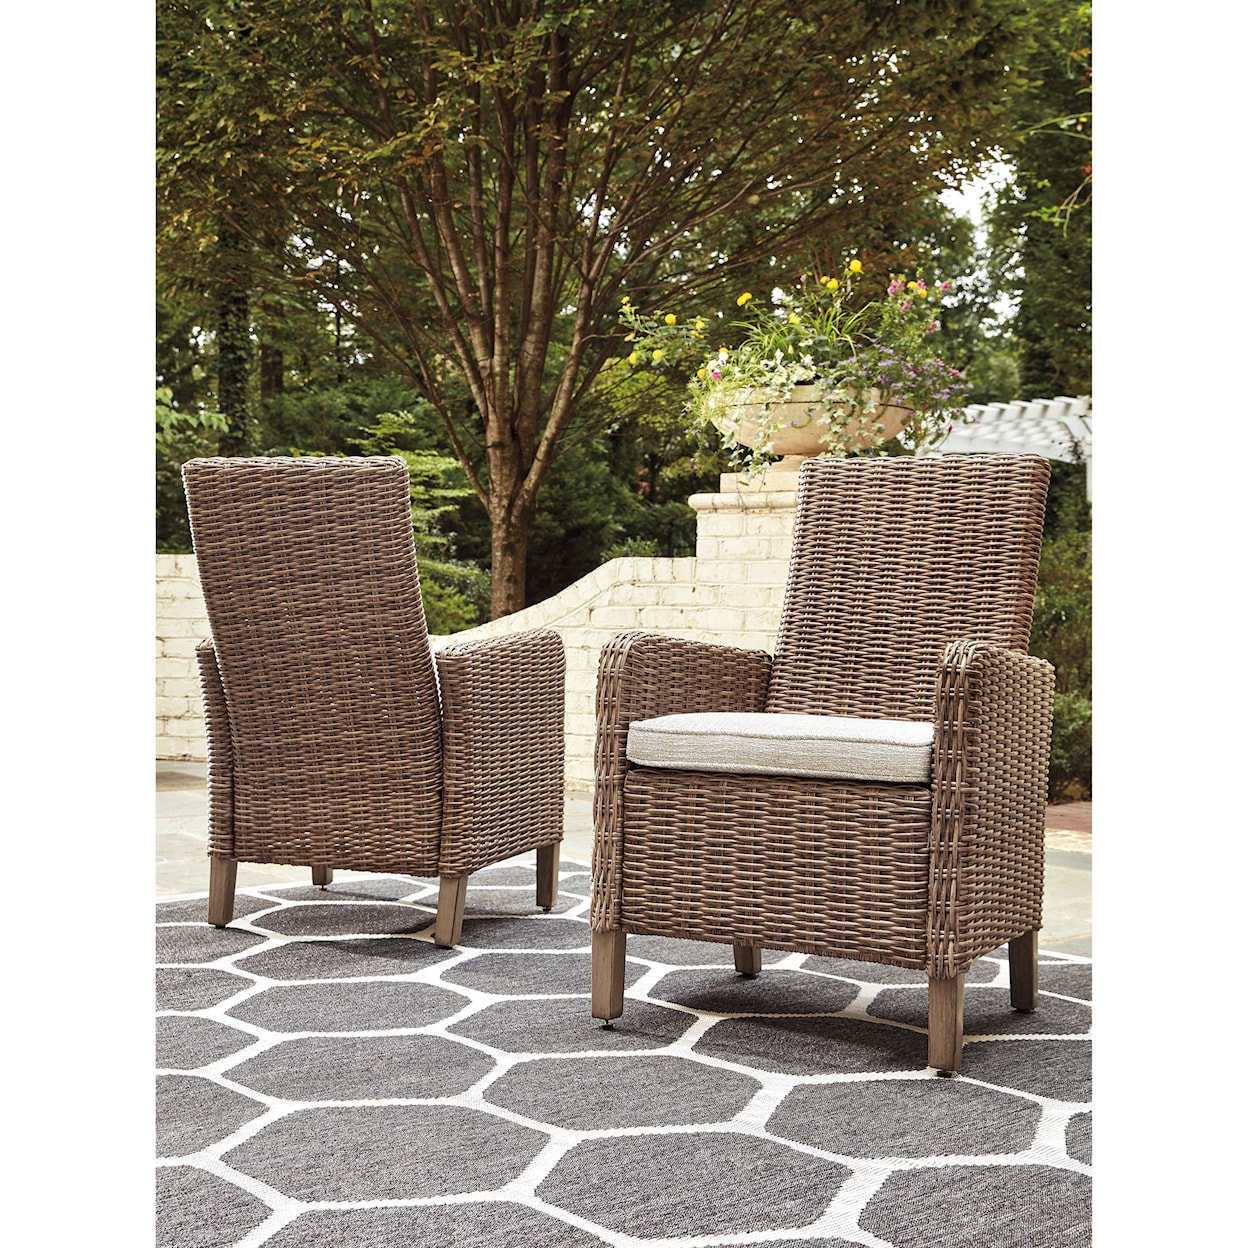 Signature Design by Ashley Beachcroft Set of 2 Arm Chairs